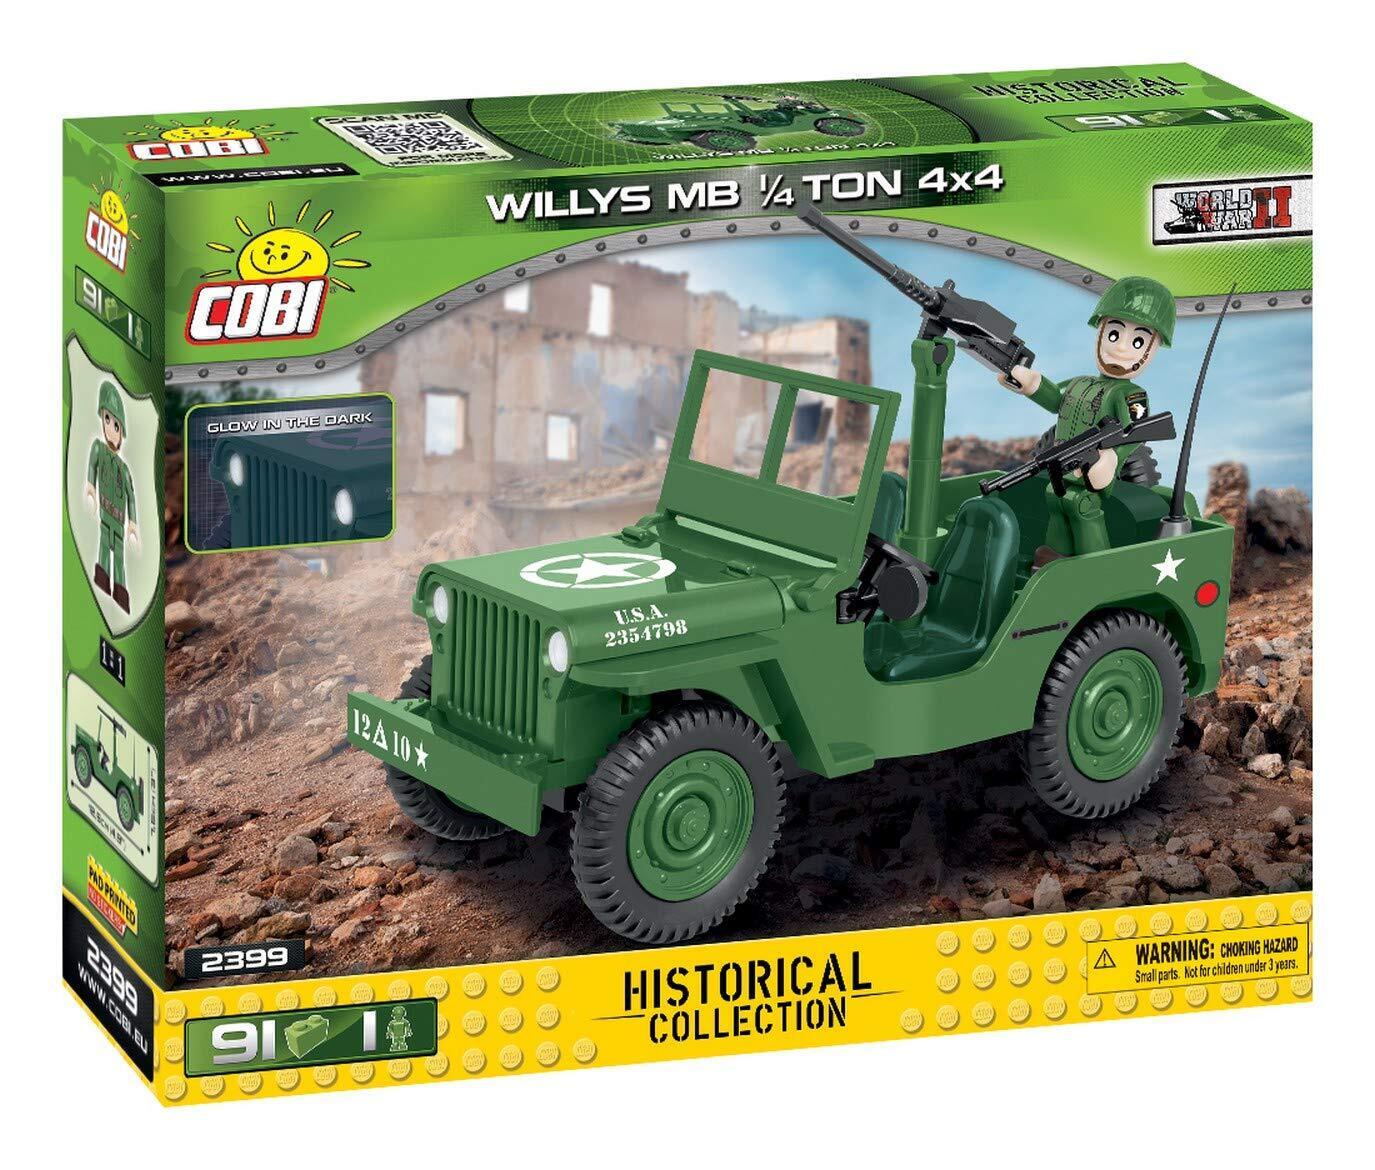 Cobi Historical Collection #2399 Willys Jeep MB (WWII US Army Jeep)